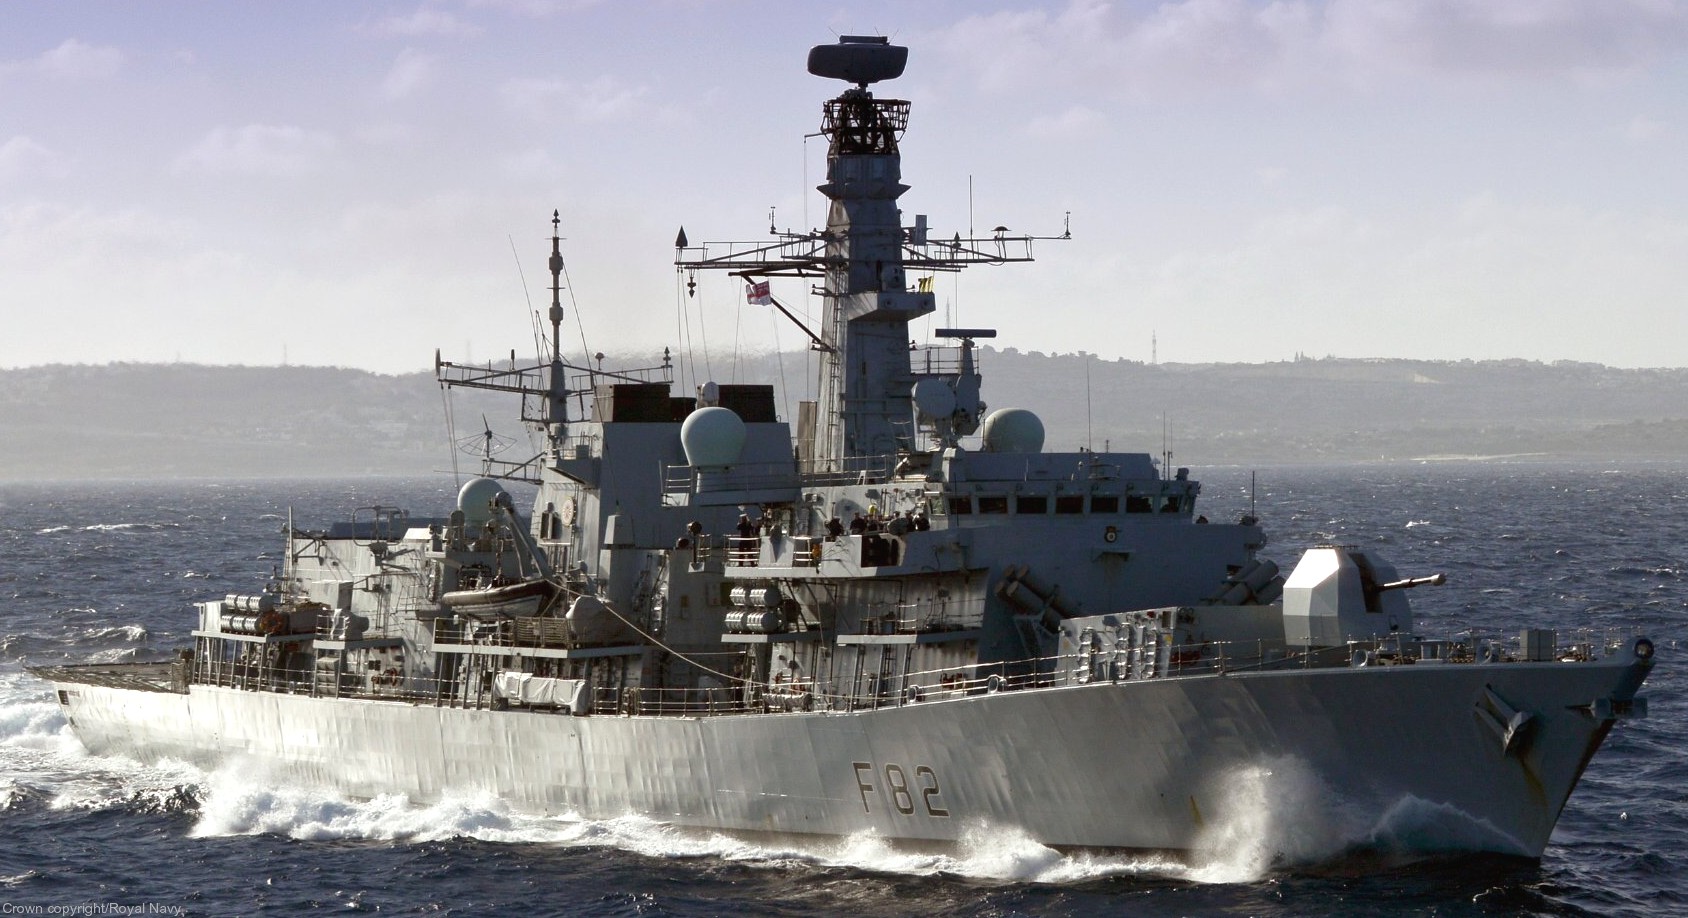 f-82 hms somerset type 23 duke class guided missile frigate ffg royal navy 41